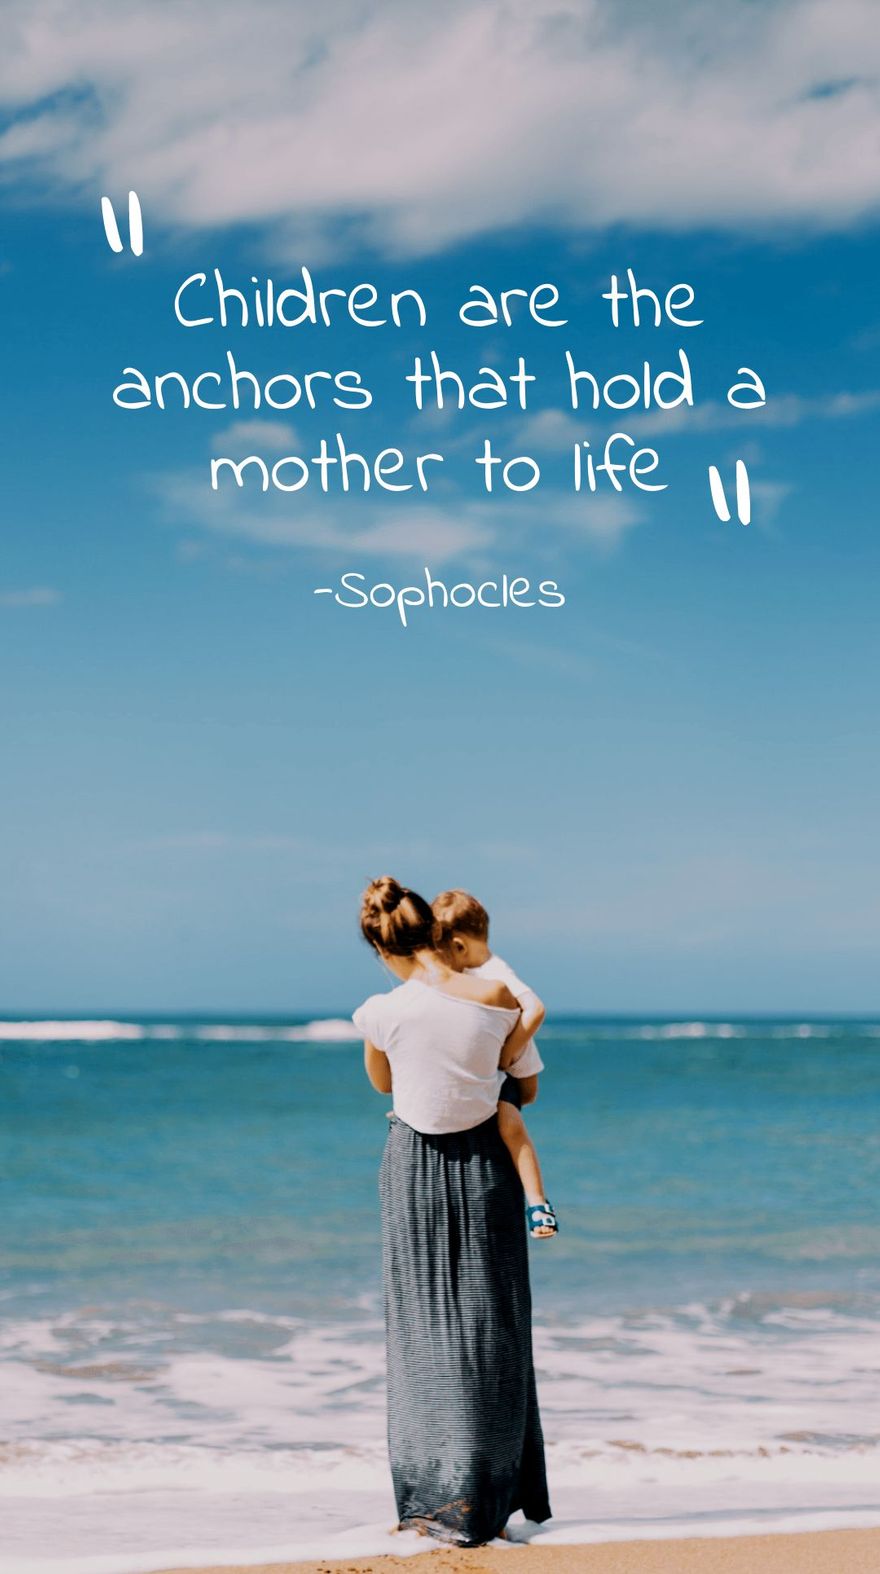 Sophocles - Children are the anchors that hold a mother to life. in JPG